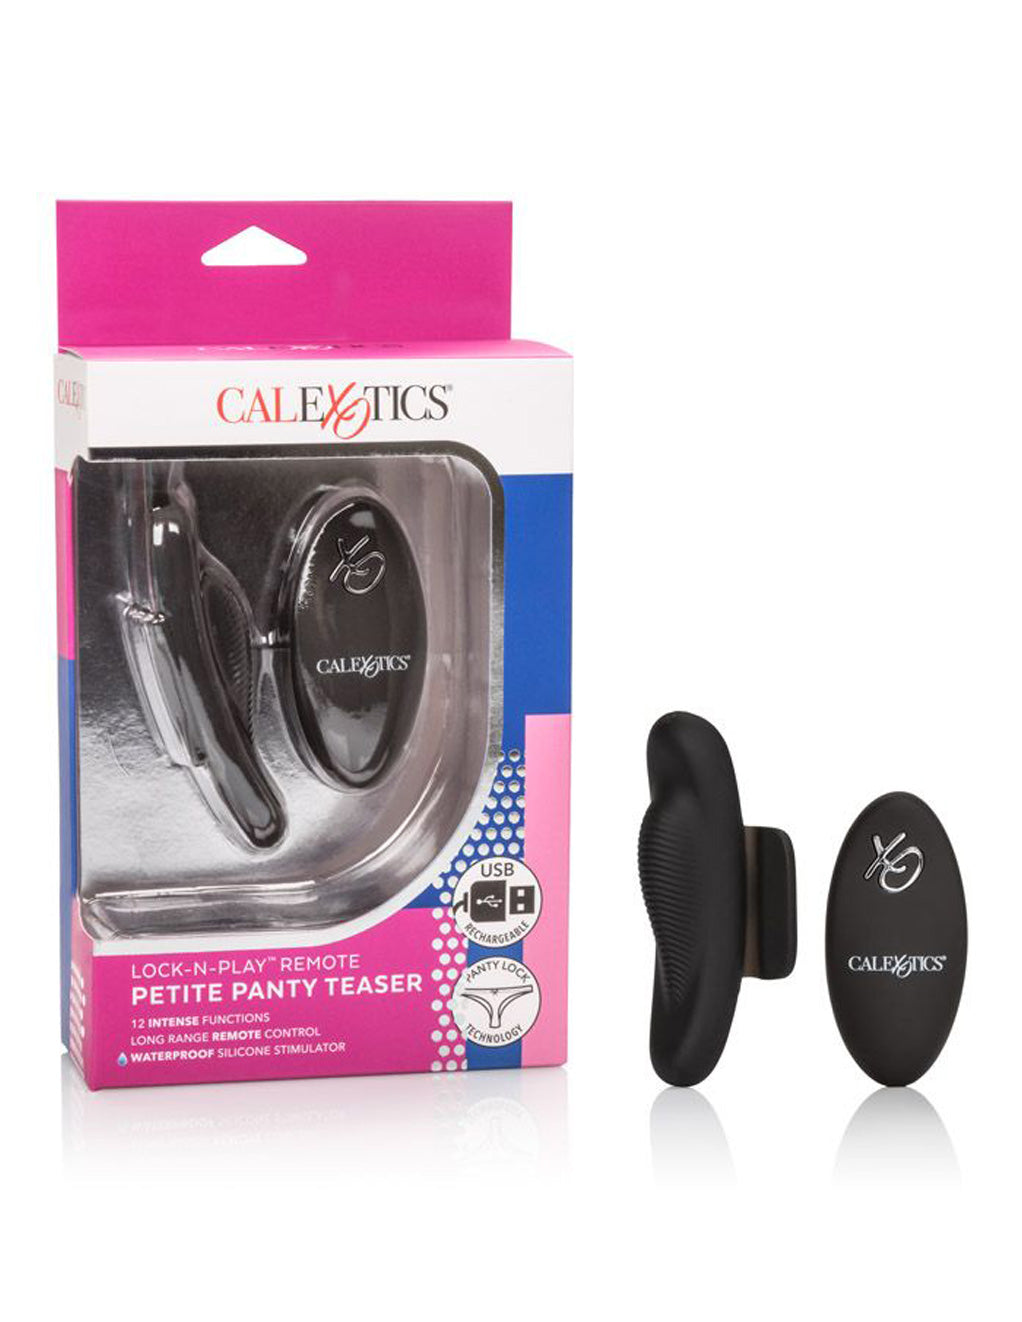 Cal Exotics Lock-N-Play Remote Petite Panty Teaser packaging with product